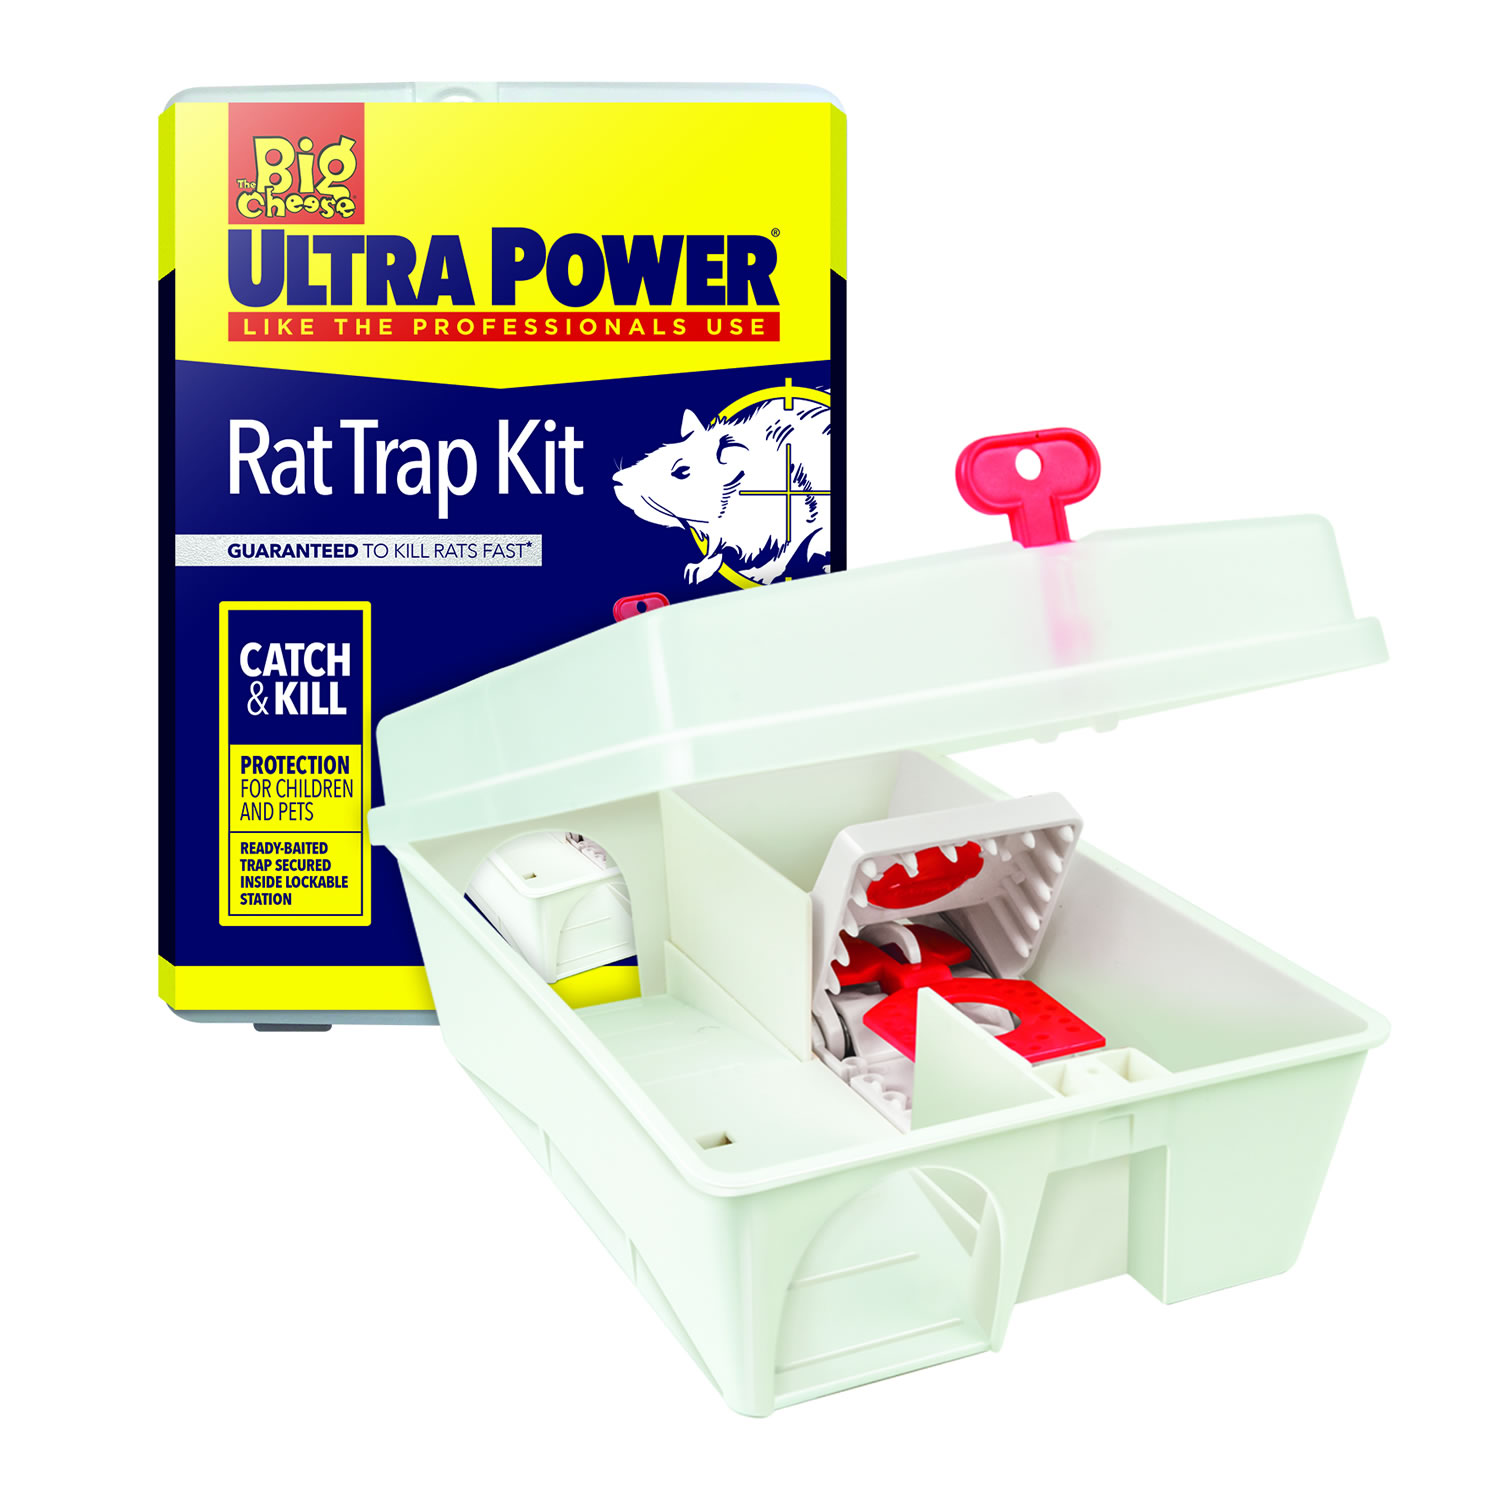 THE BIG CHEESE ULTRA POWER RAT TRAP KIT